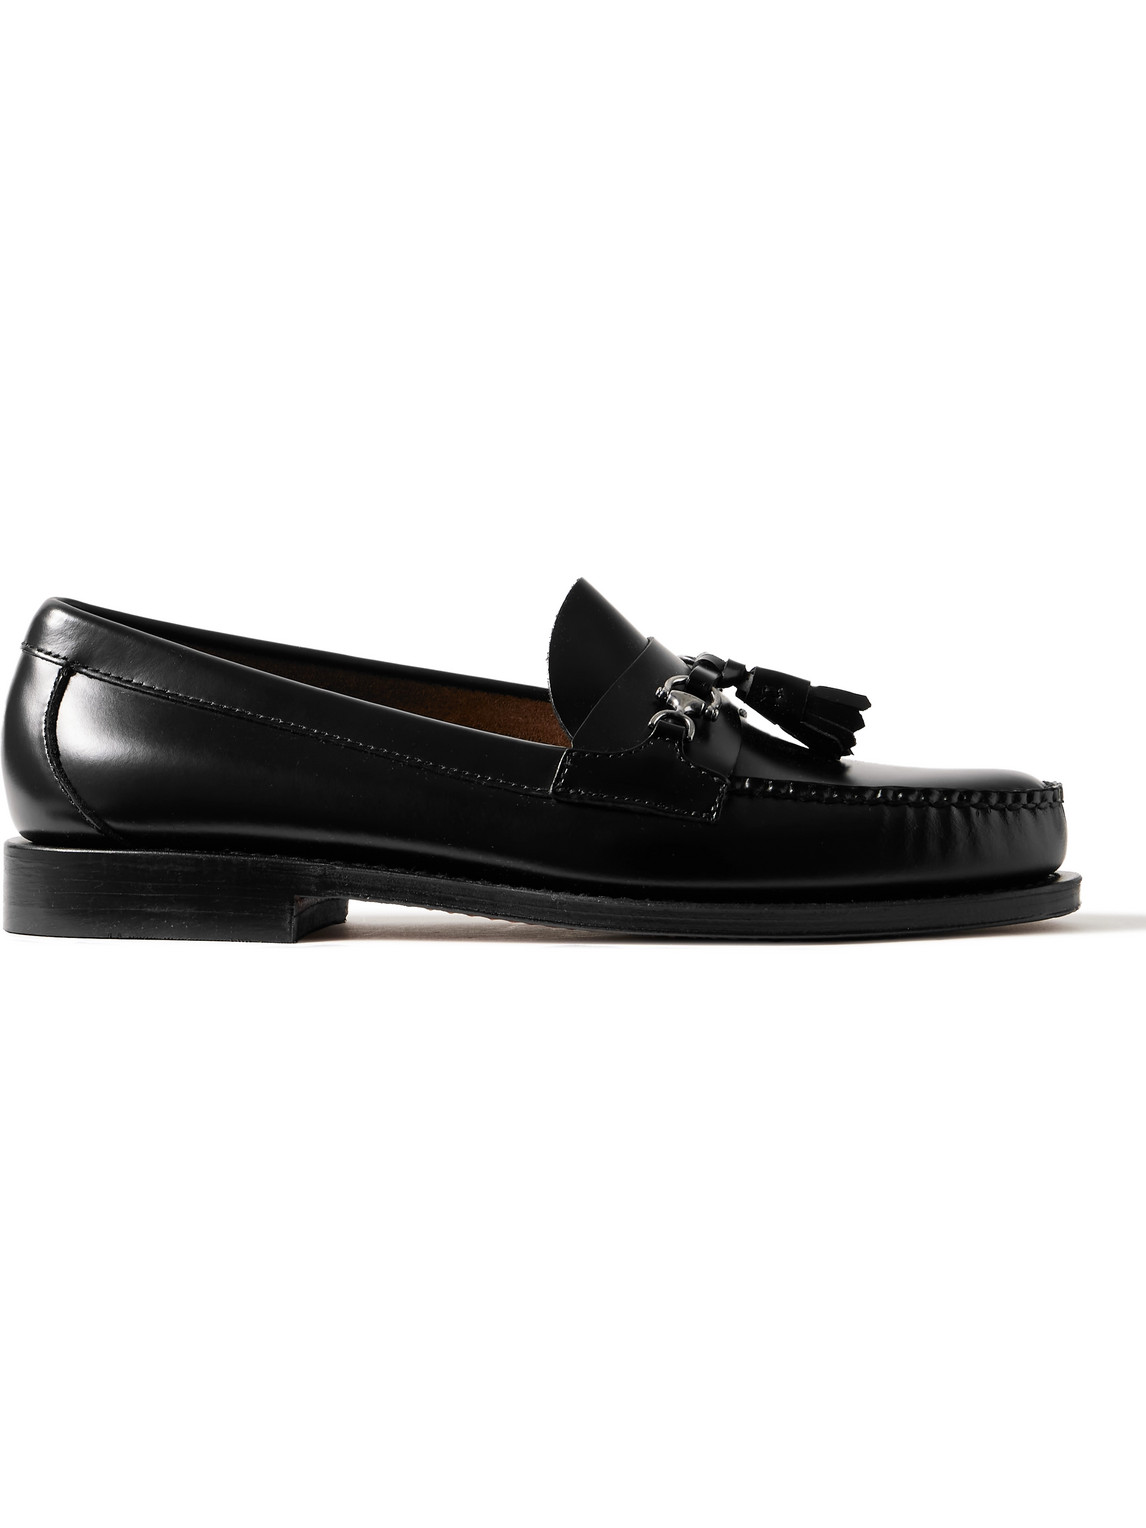 Weejuns Heritage Lincoln Embellished Tasselled Leather Loafers